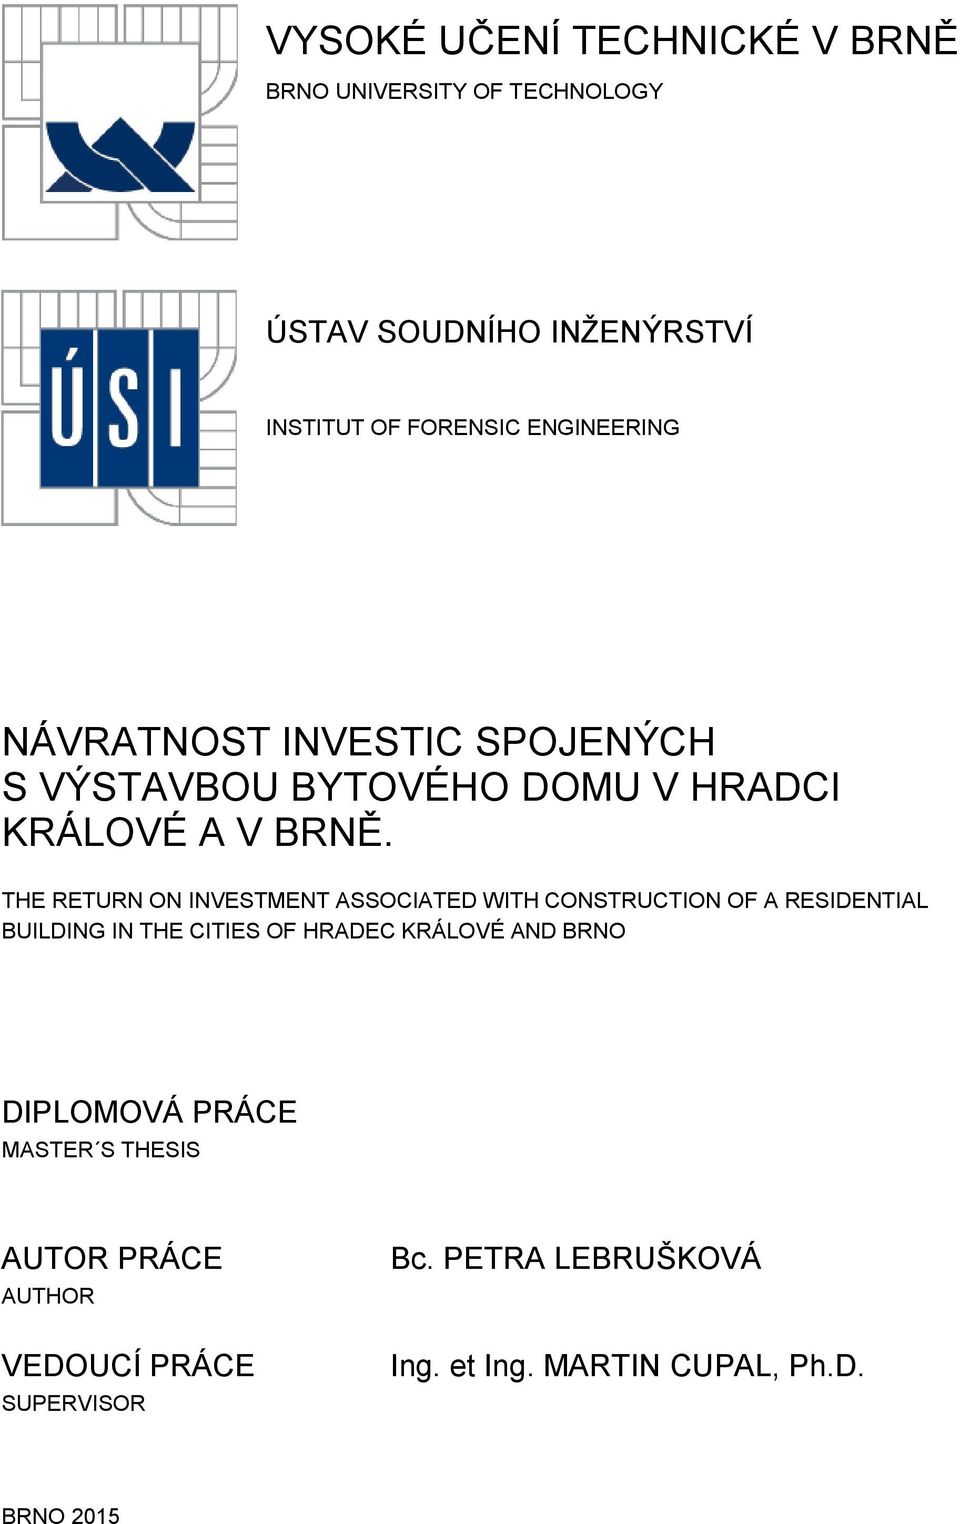 THE RETURN ON INVESTMENT ASSOCIATED WITH CONSTRUCTION OF A RESIDENTIAL BUILDING IN THE CITIES OF HRADEC KRÁLOVÉ AND